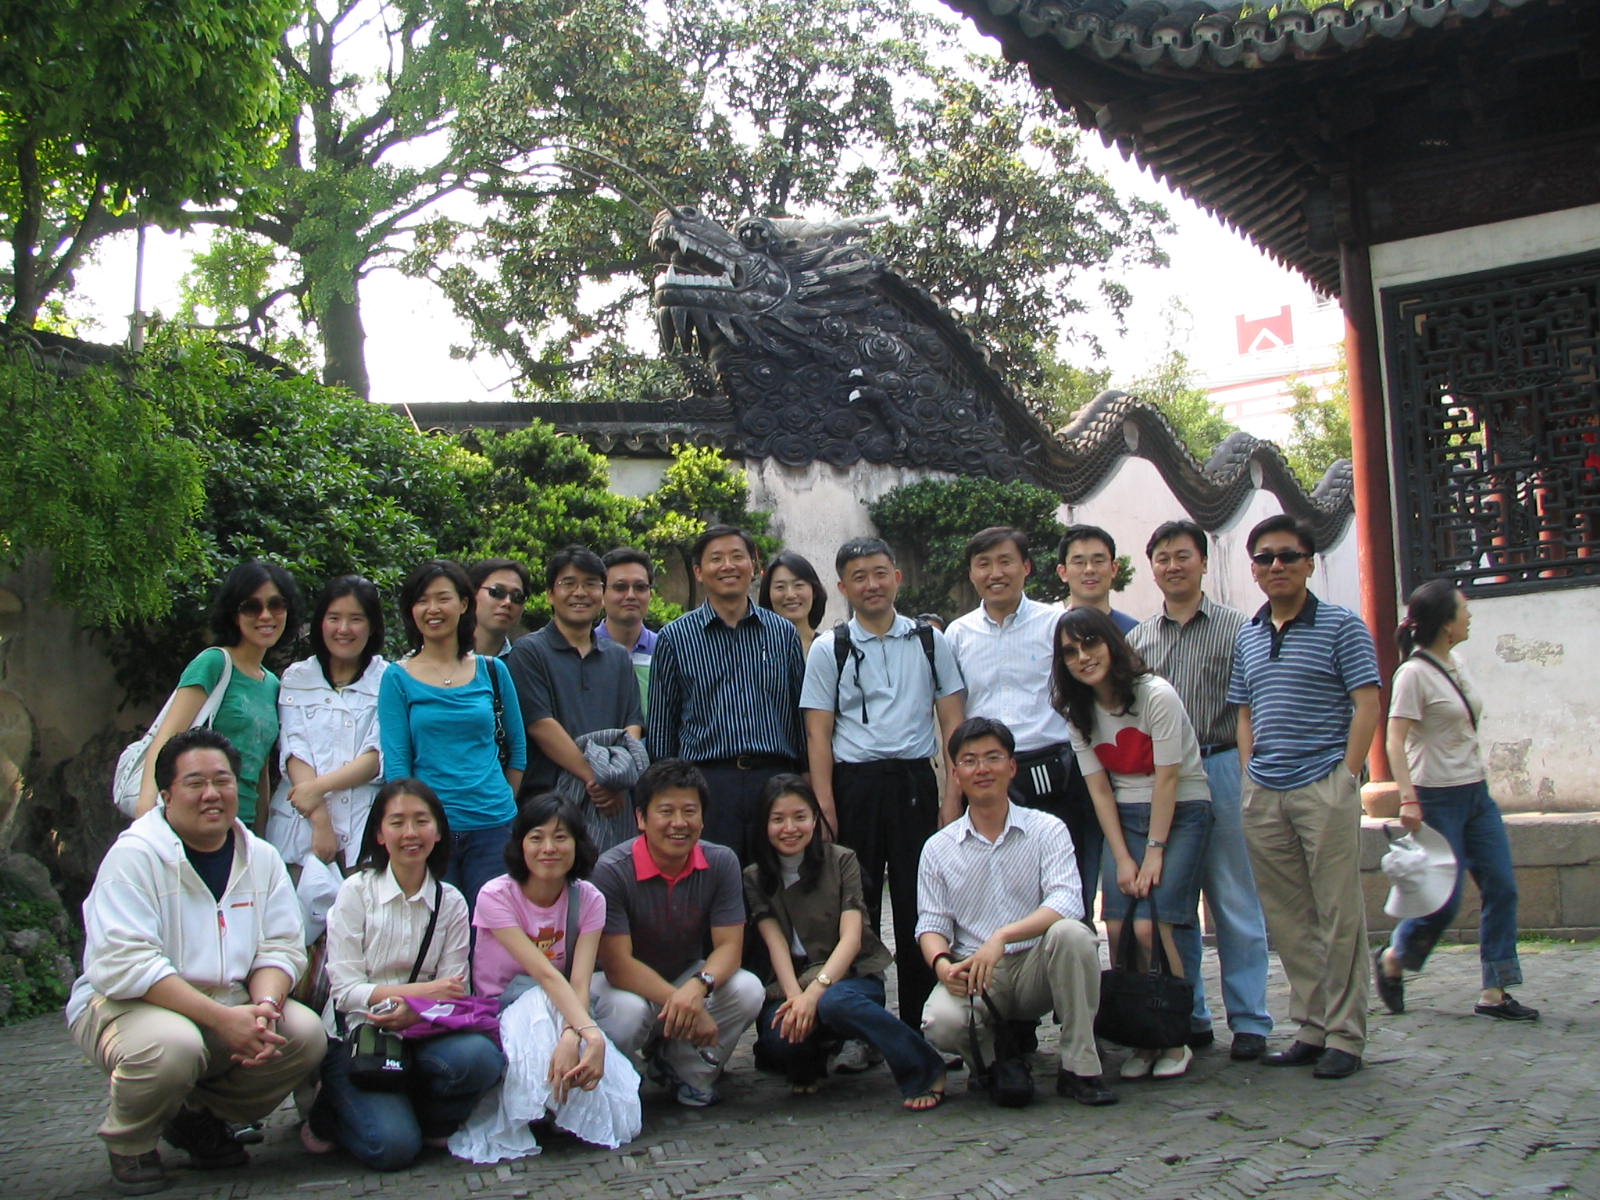 After the e-MBA Pre-Graduation Trip to China